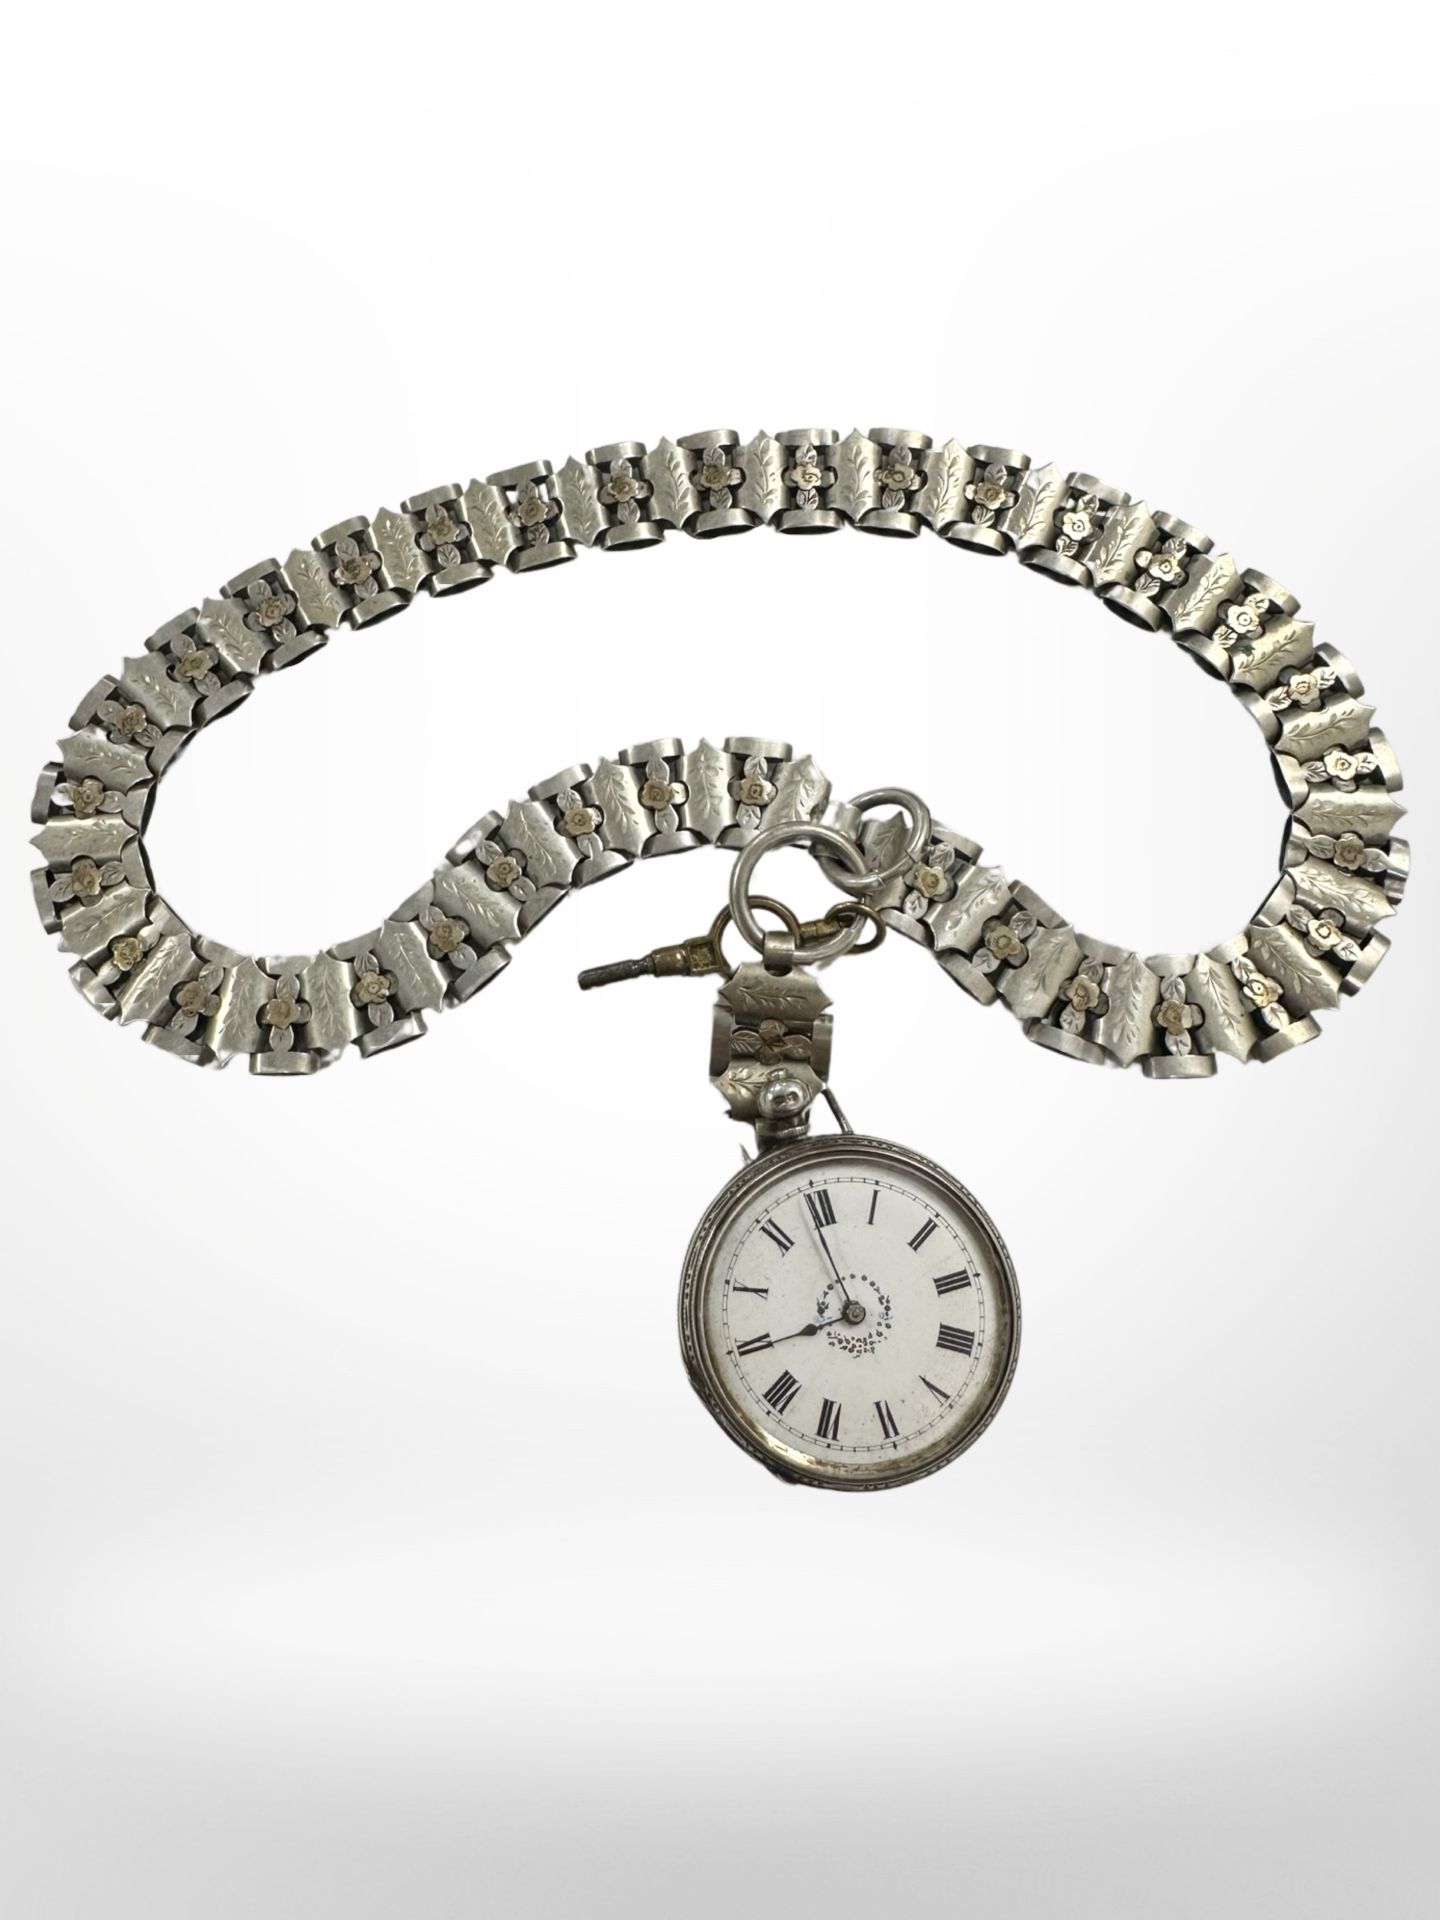 A continental silver fob watch upon an ornate fancy-link chain